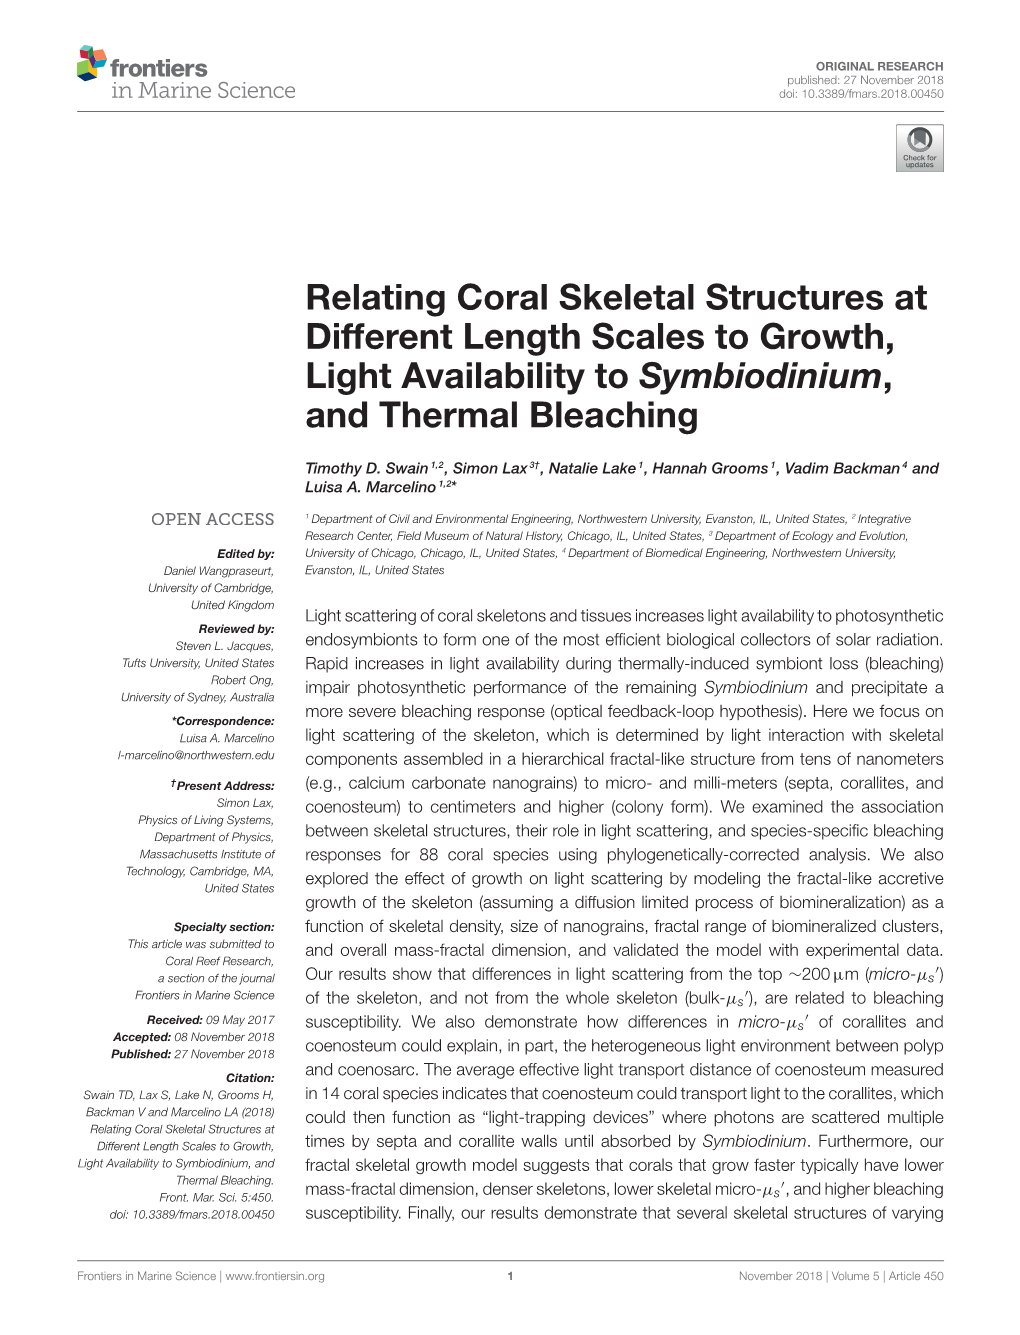 Relating Coral Skeletal Structures at Different Length Scales to Growth, Light Availability to Symbiodinium, and Thermal Bleaching